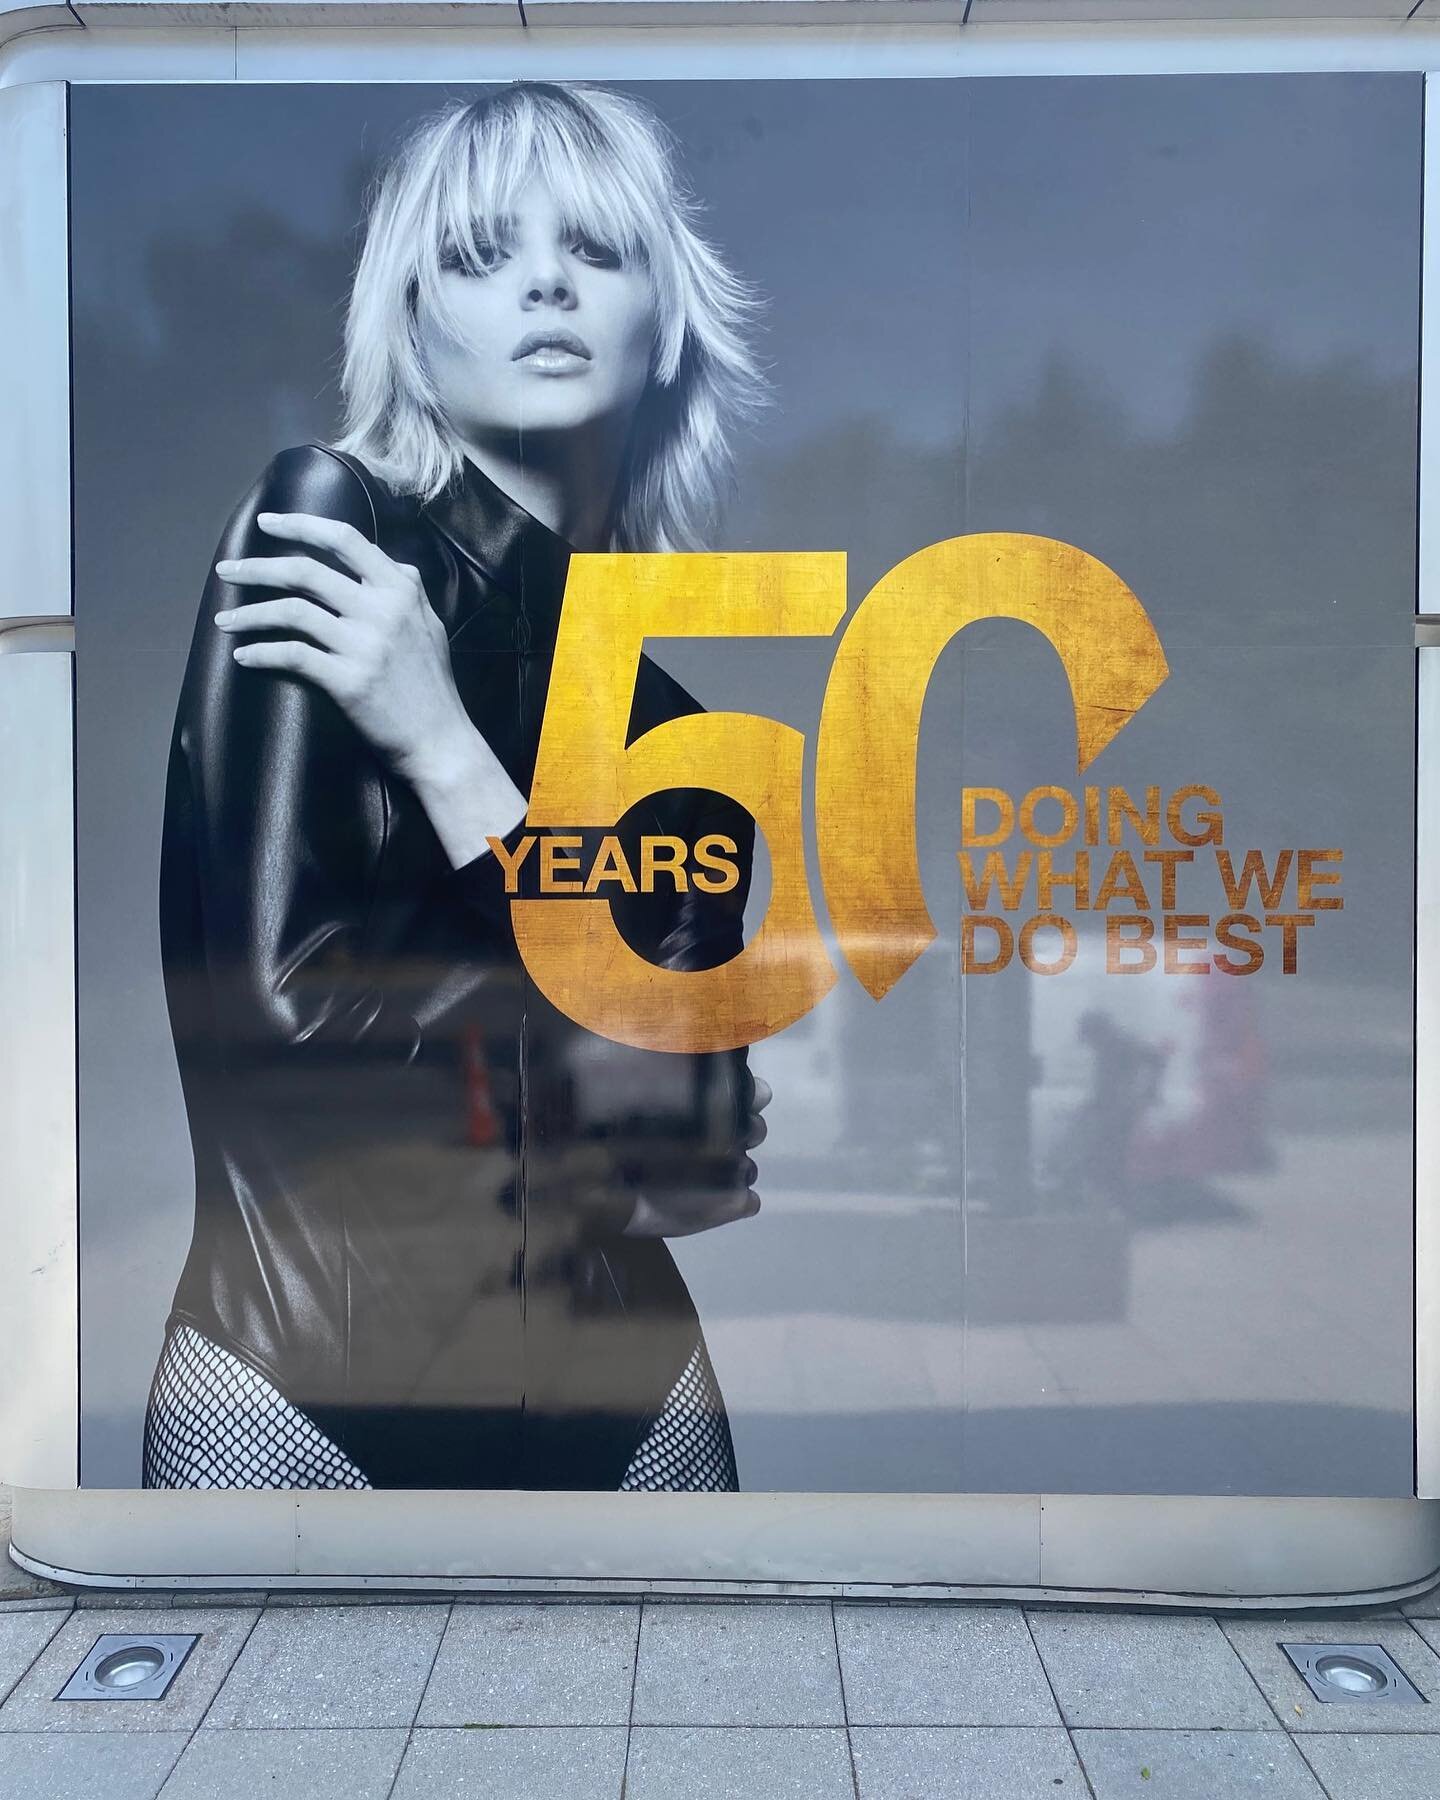 Congrats @nubestsalon on 50 years in business. What an incredible milestone!  No better way to celebrate than with a fabulous full building wall mural printed and installed by the team @chiefgraphix